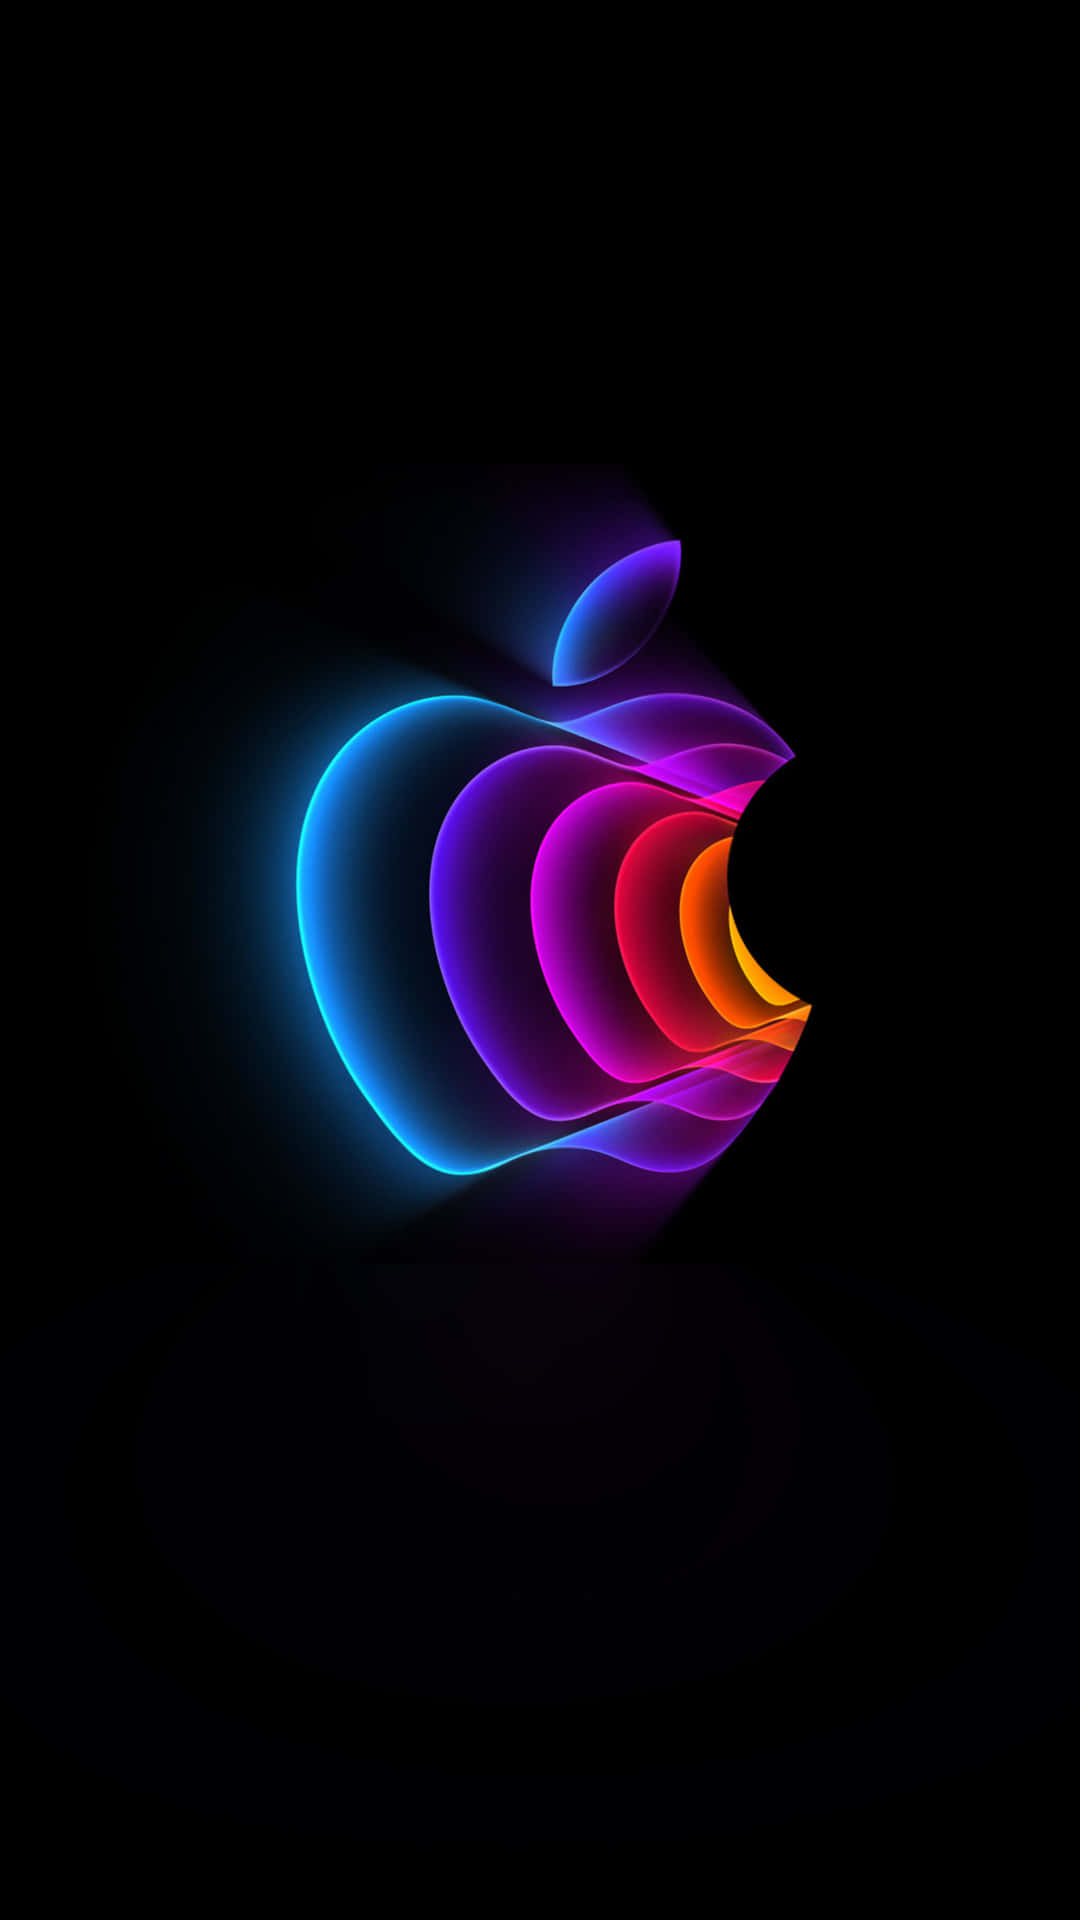 These Apple Colors Wallpaper